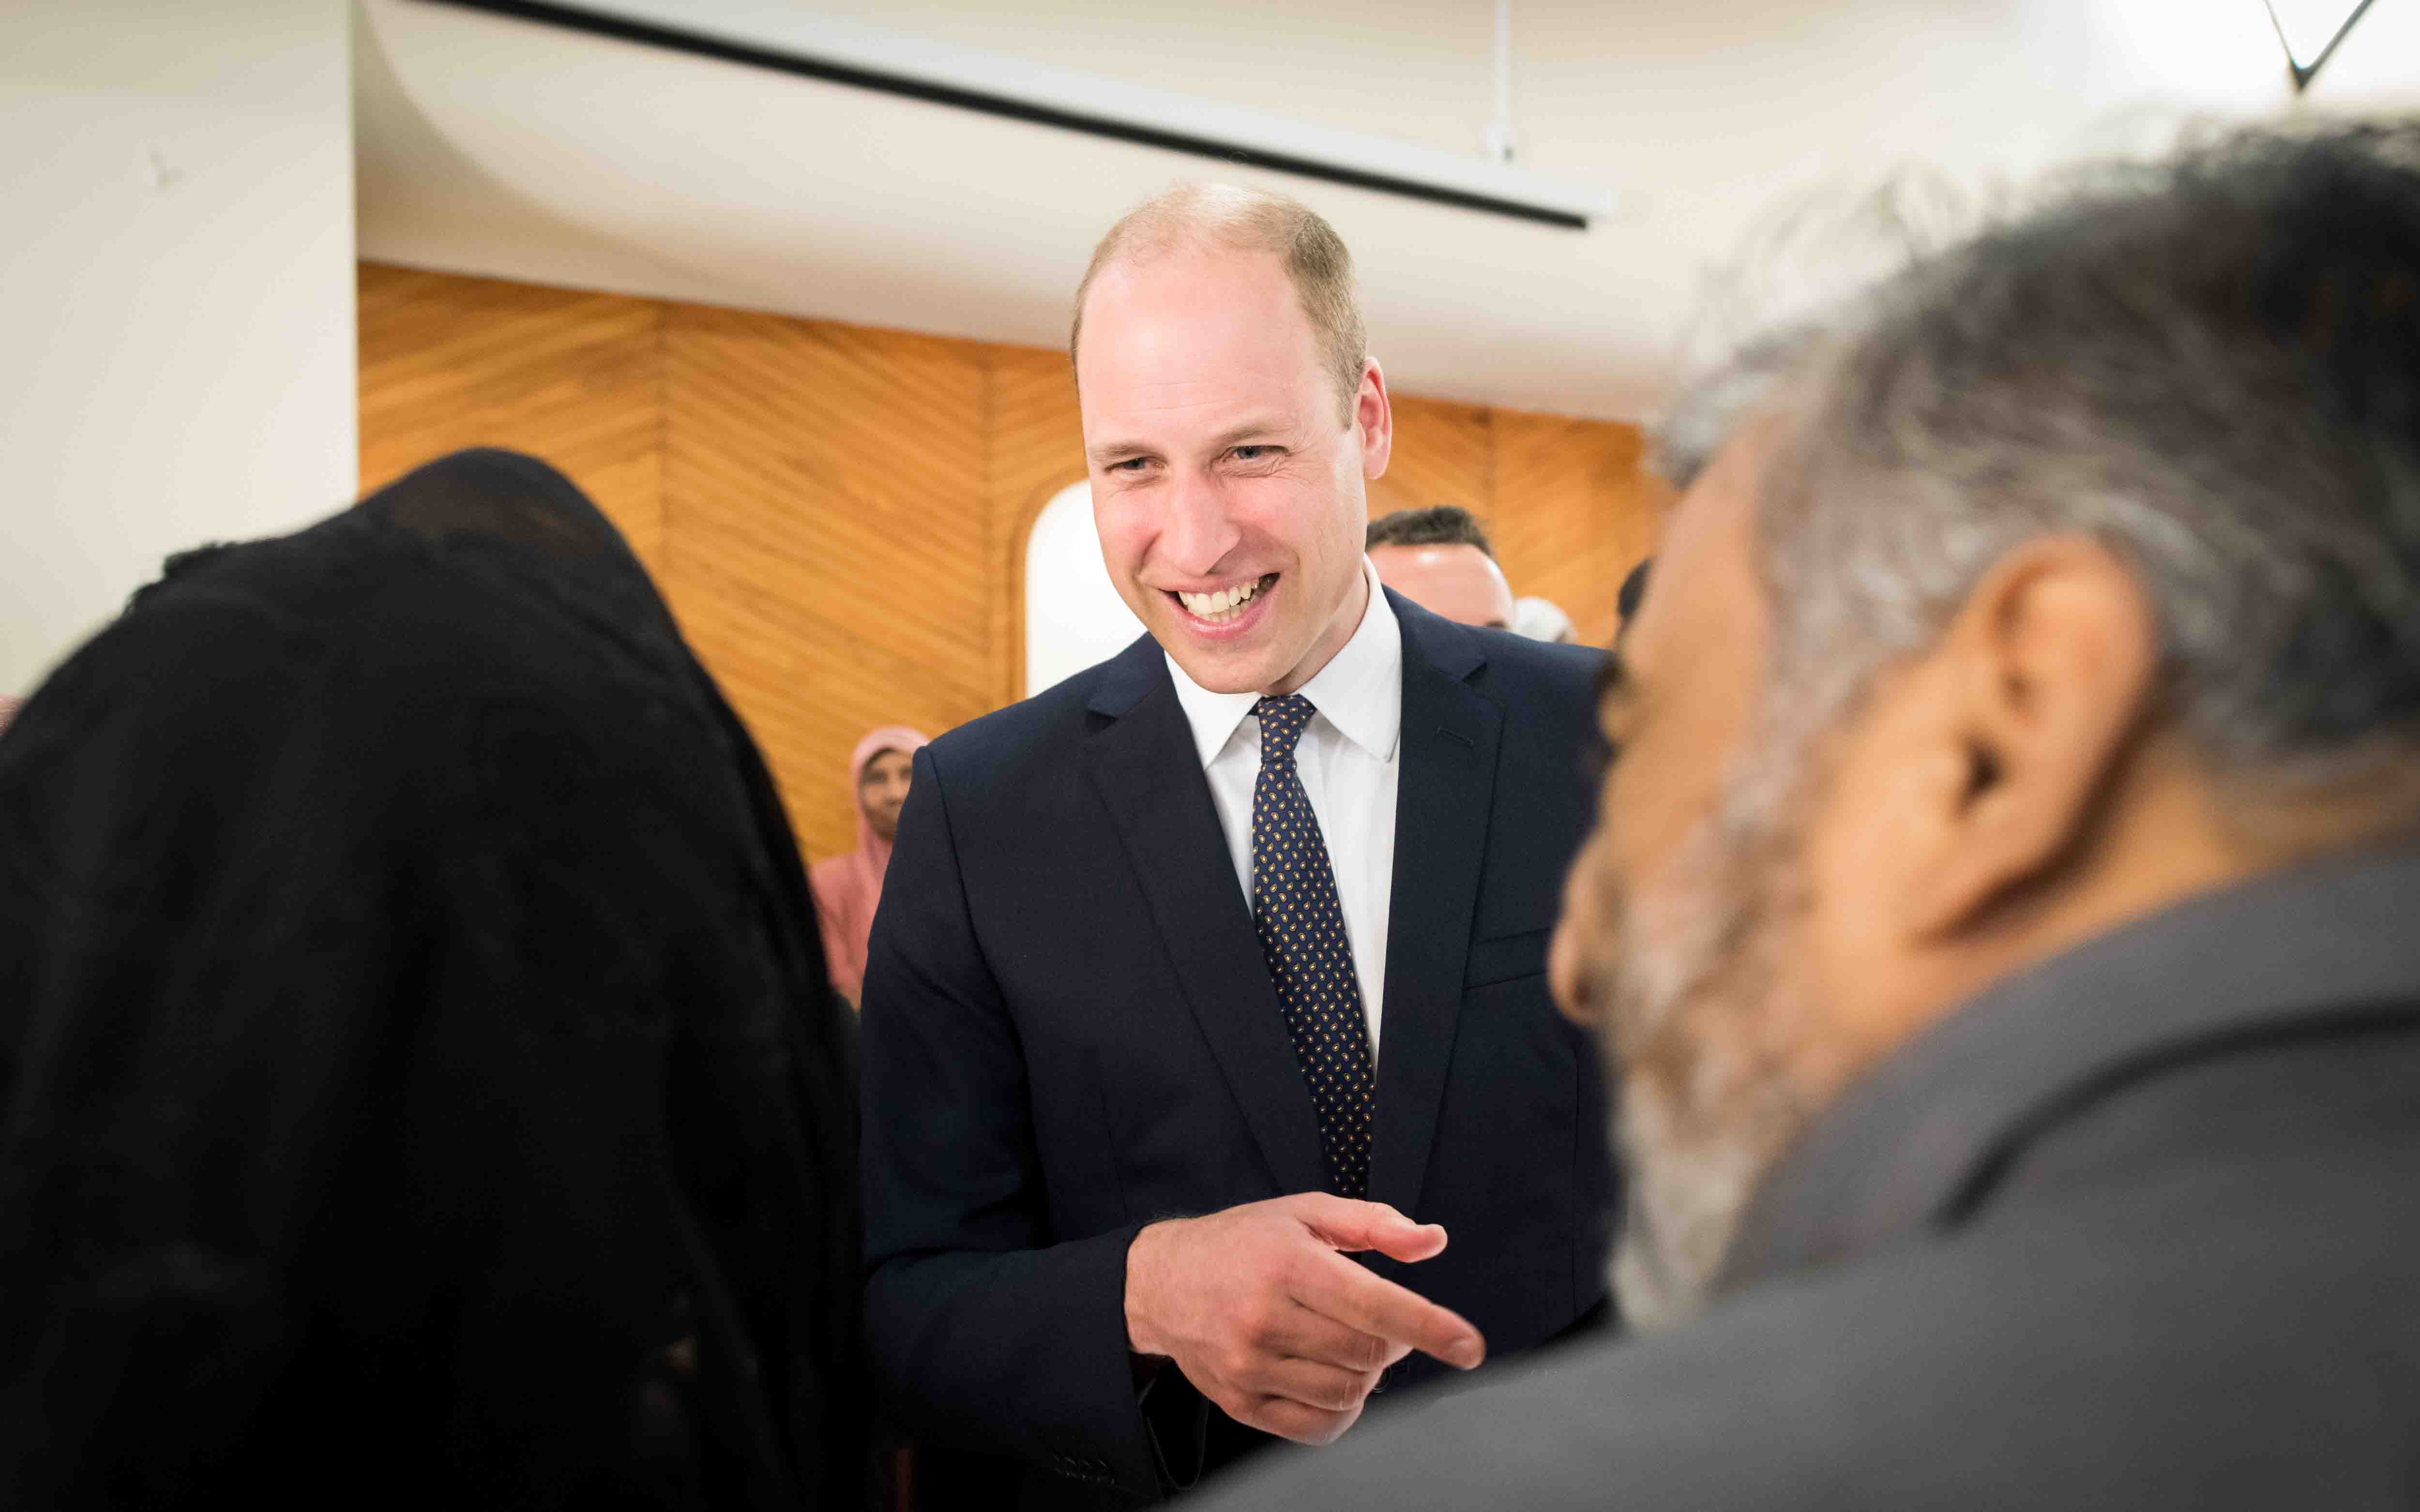 'Prince William talks with members of the Muslim community